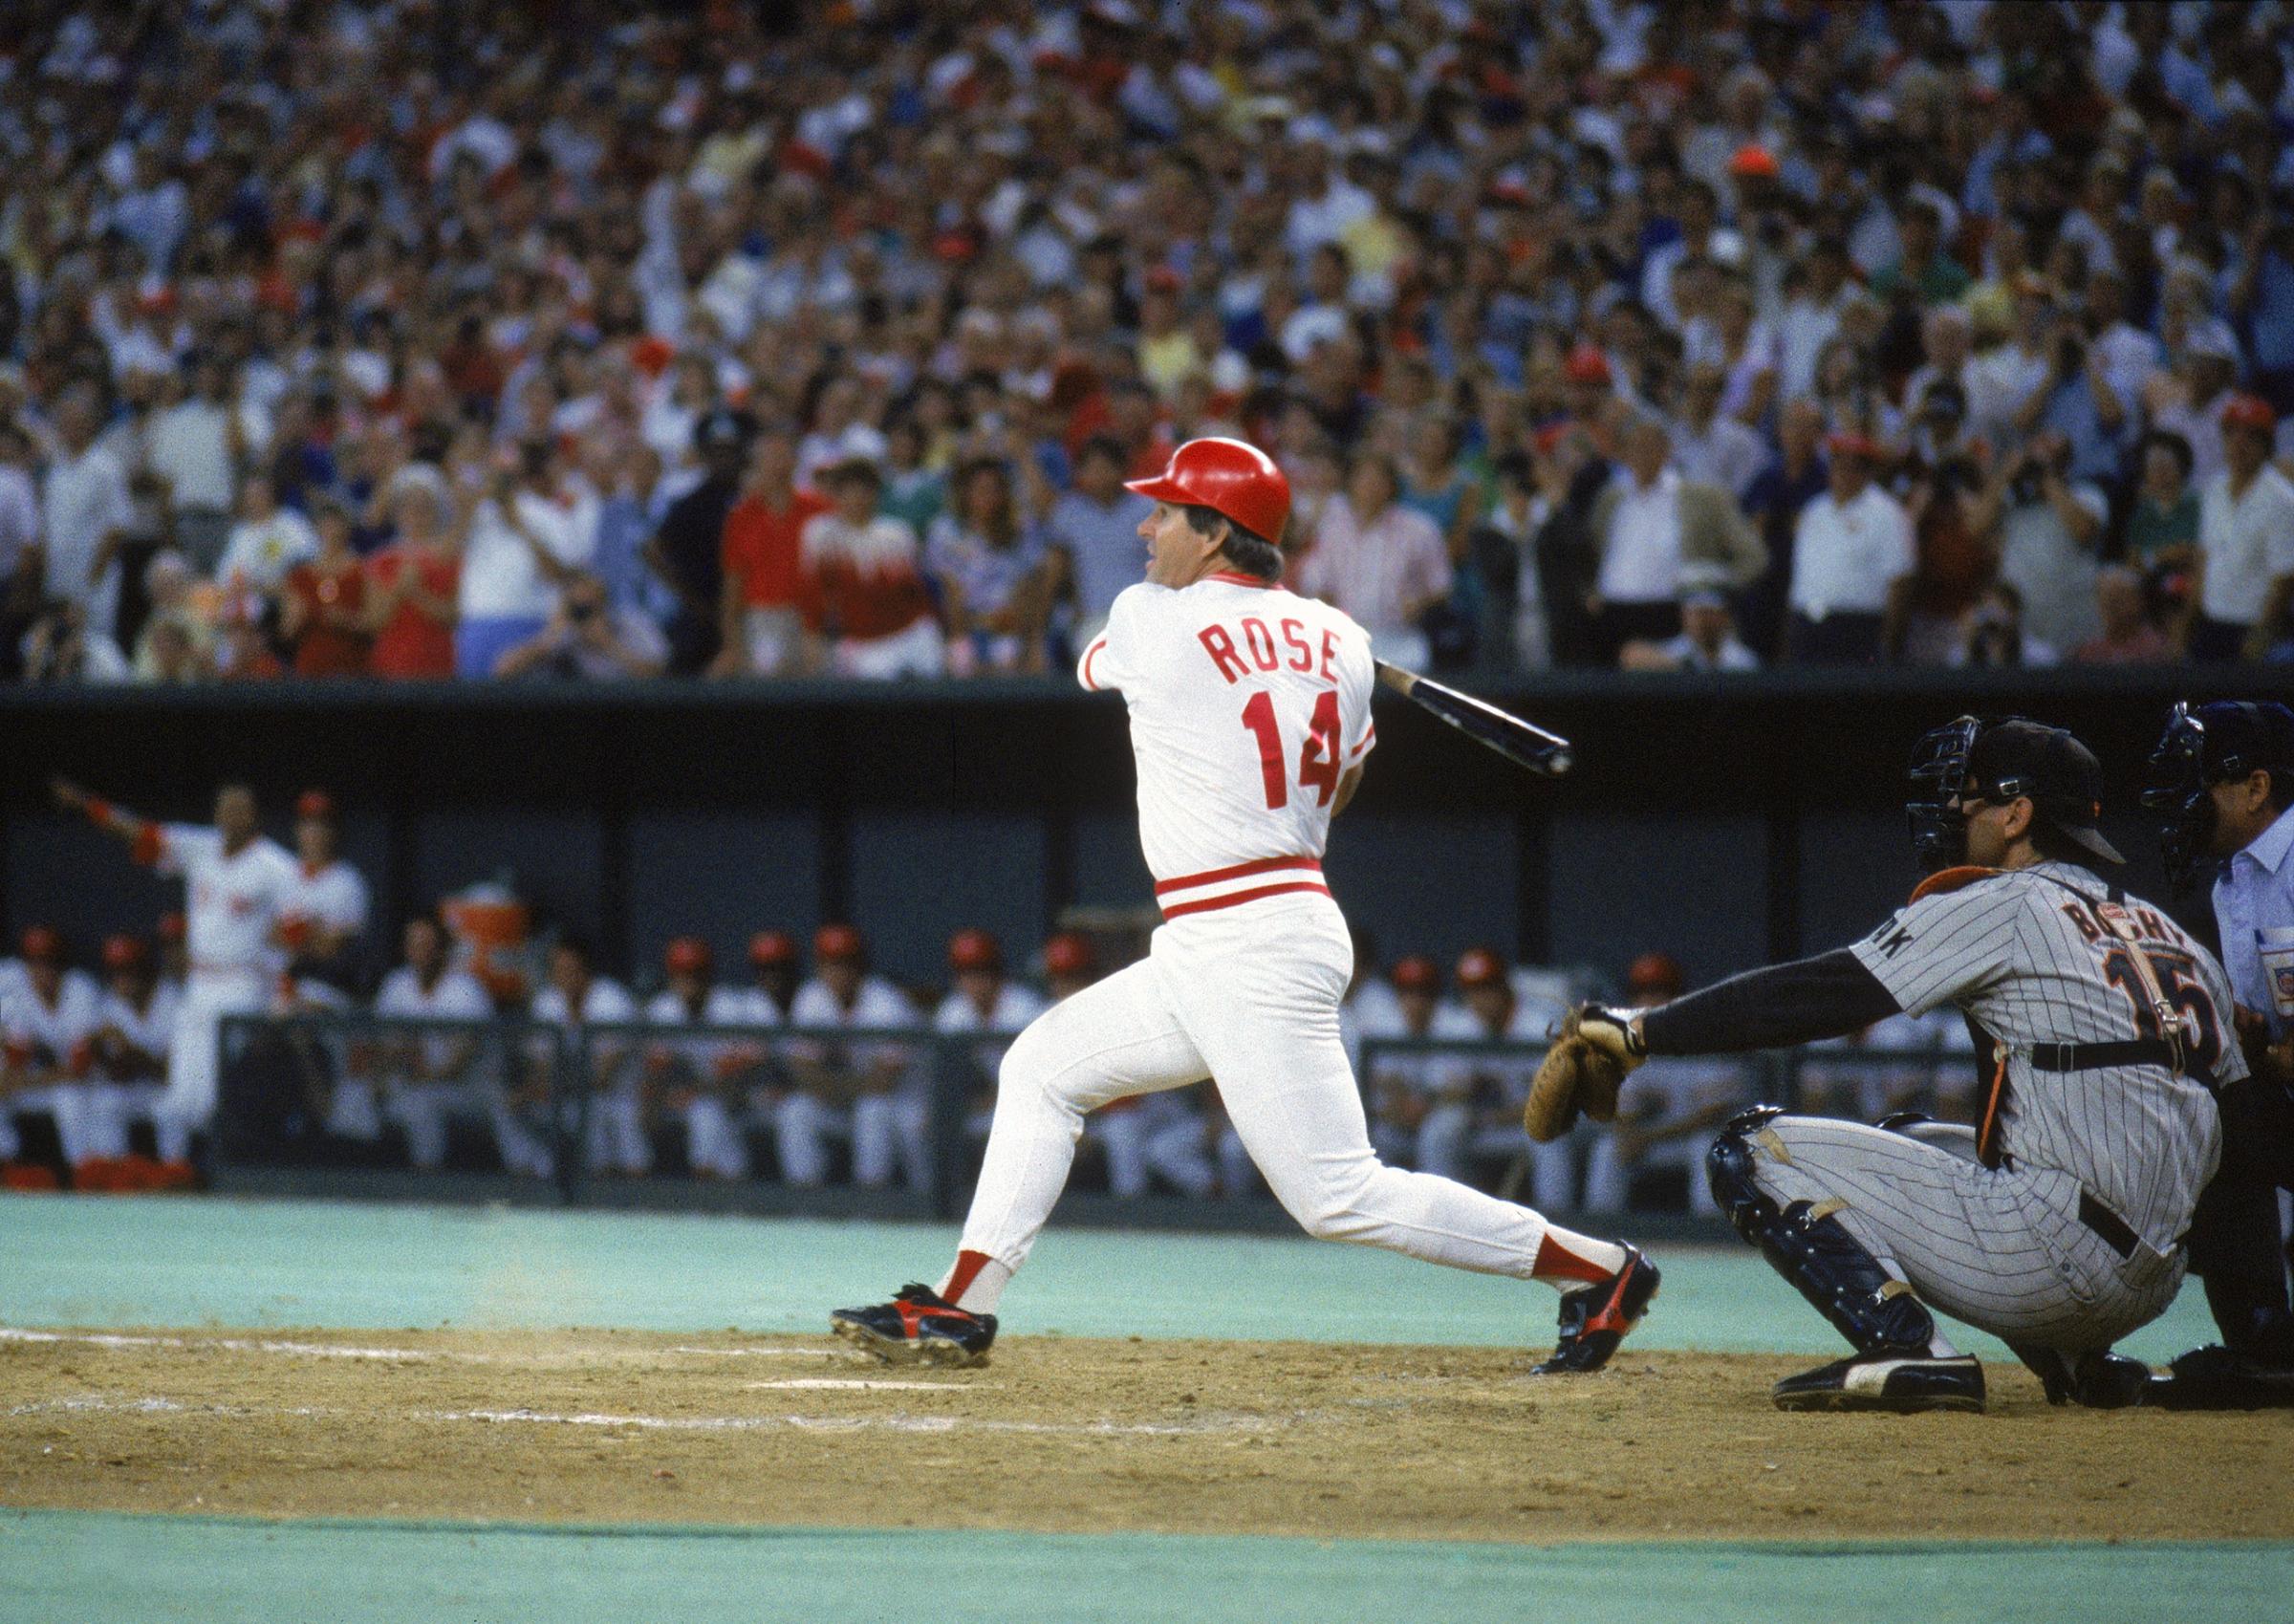 Pete Rose #14 of the Cincinnati Reds follows through with the hit against the San Diego Padres during a game on September 11, 1985 at Riverfront Stadium in Cincinnati, Ohio. Pete Rose scores his 4192 hit off of pitcher Eric Show, breaking Ty Cobb's record.